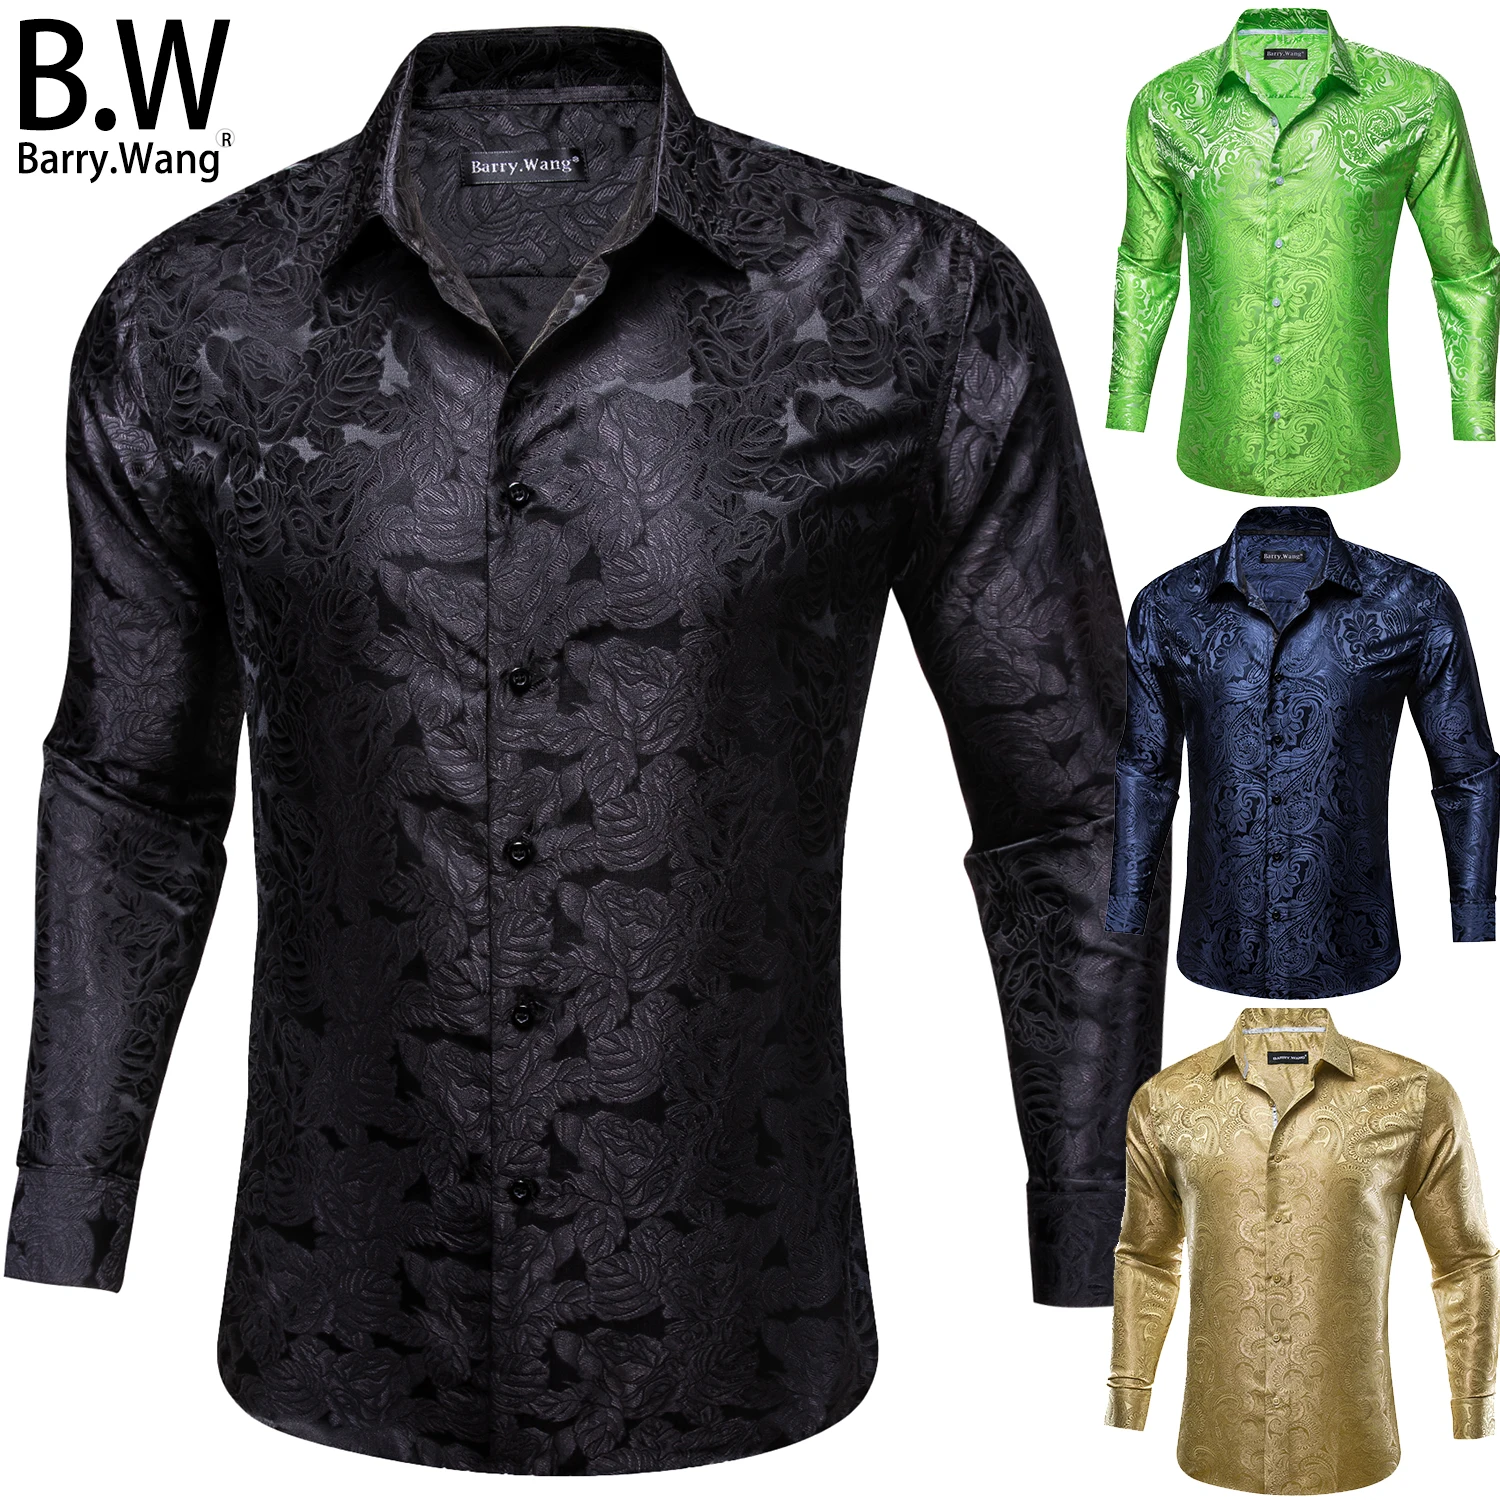 

Barry.Wang Long Sleeve Mens Shirts Jacquard Paisley Floral High Quality Silk Formal Casual Male Blouses Wedding Business Prom